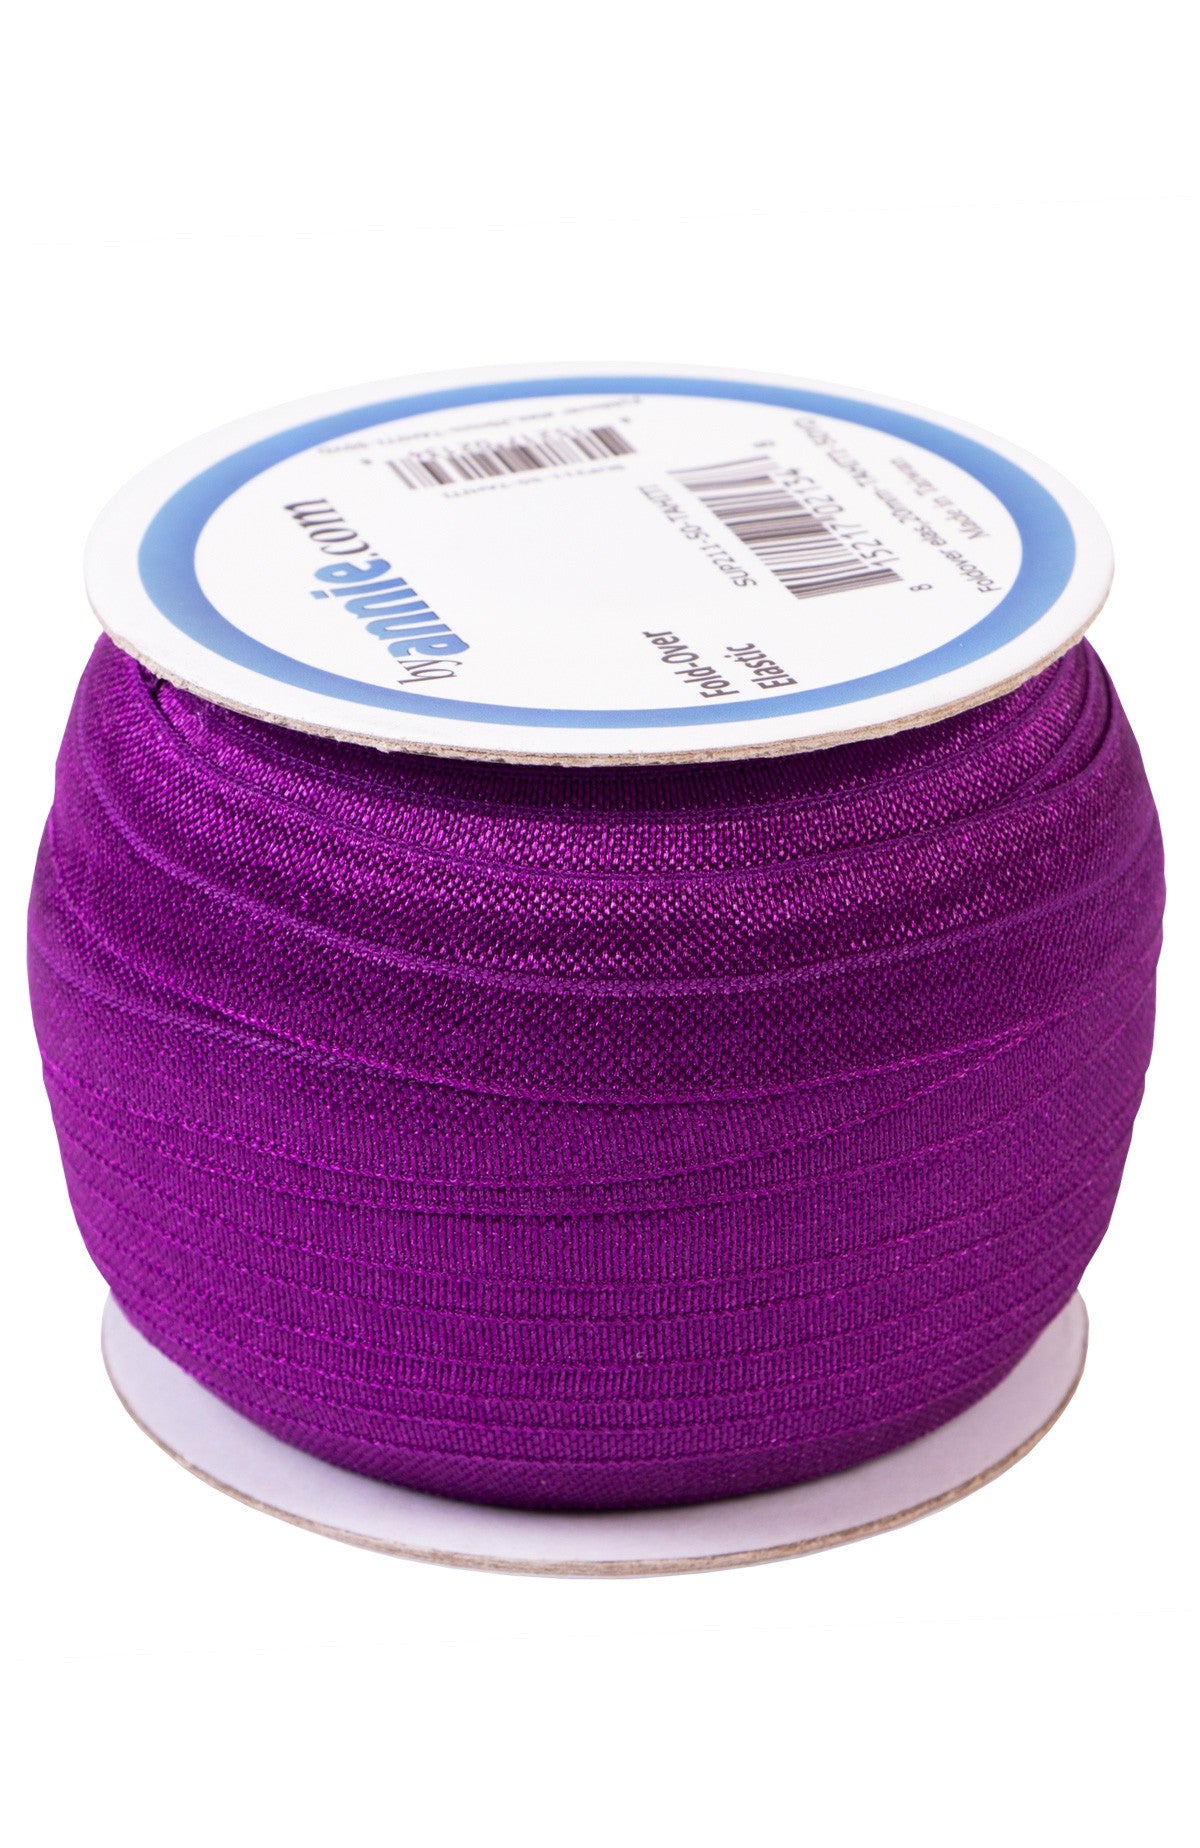 Annie's Fold-Over Elastic (3/4 x 50yds) : Sewing Parts Online